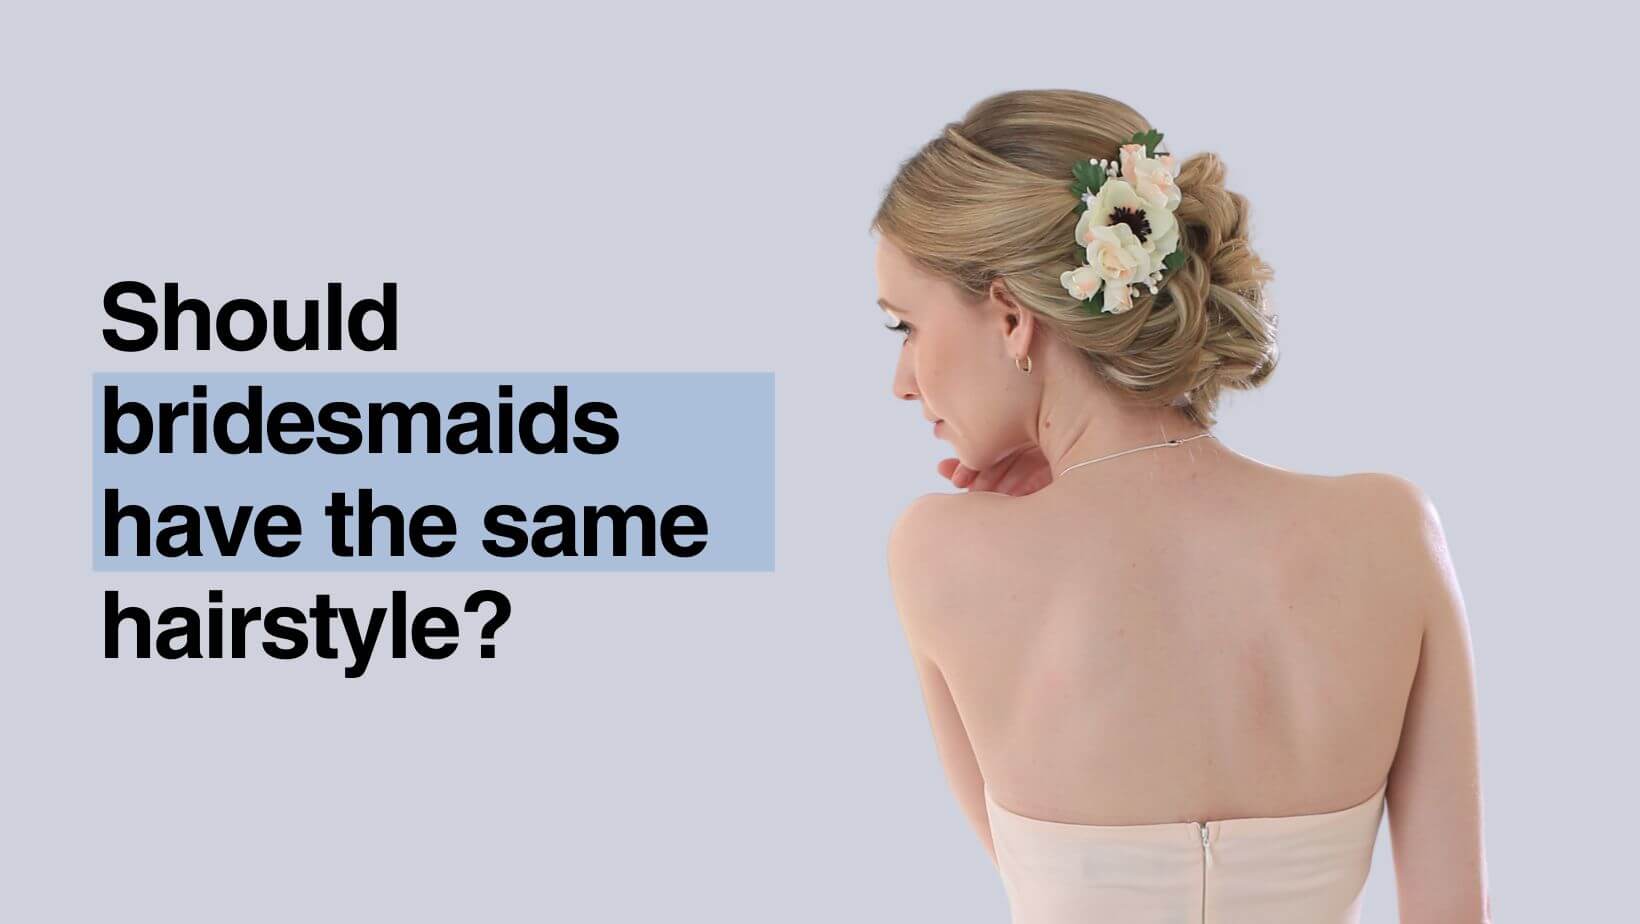 Should bridesmaids have the same hairstyle?